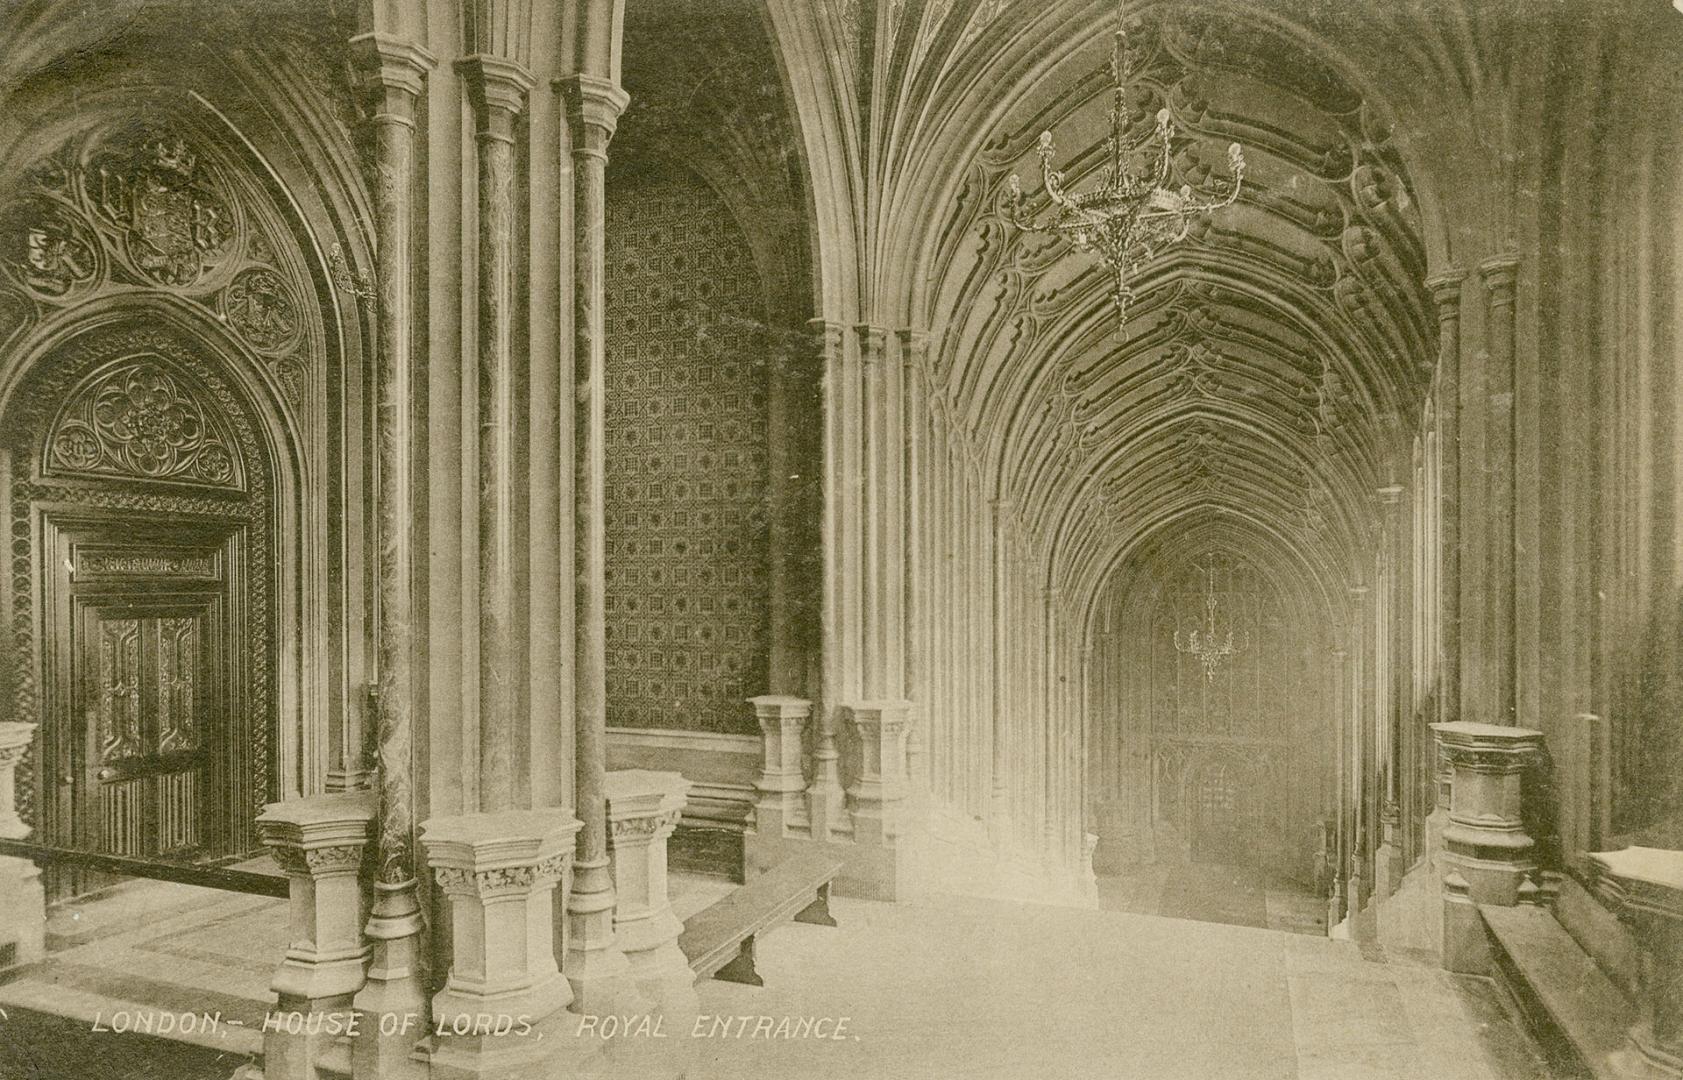 Black and white postcard of the Royal Entrance of the House of Lords (London, England).